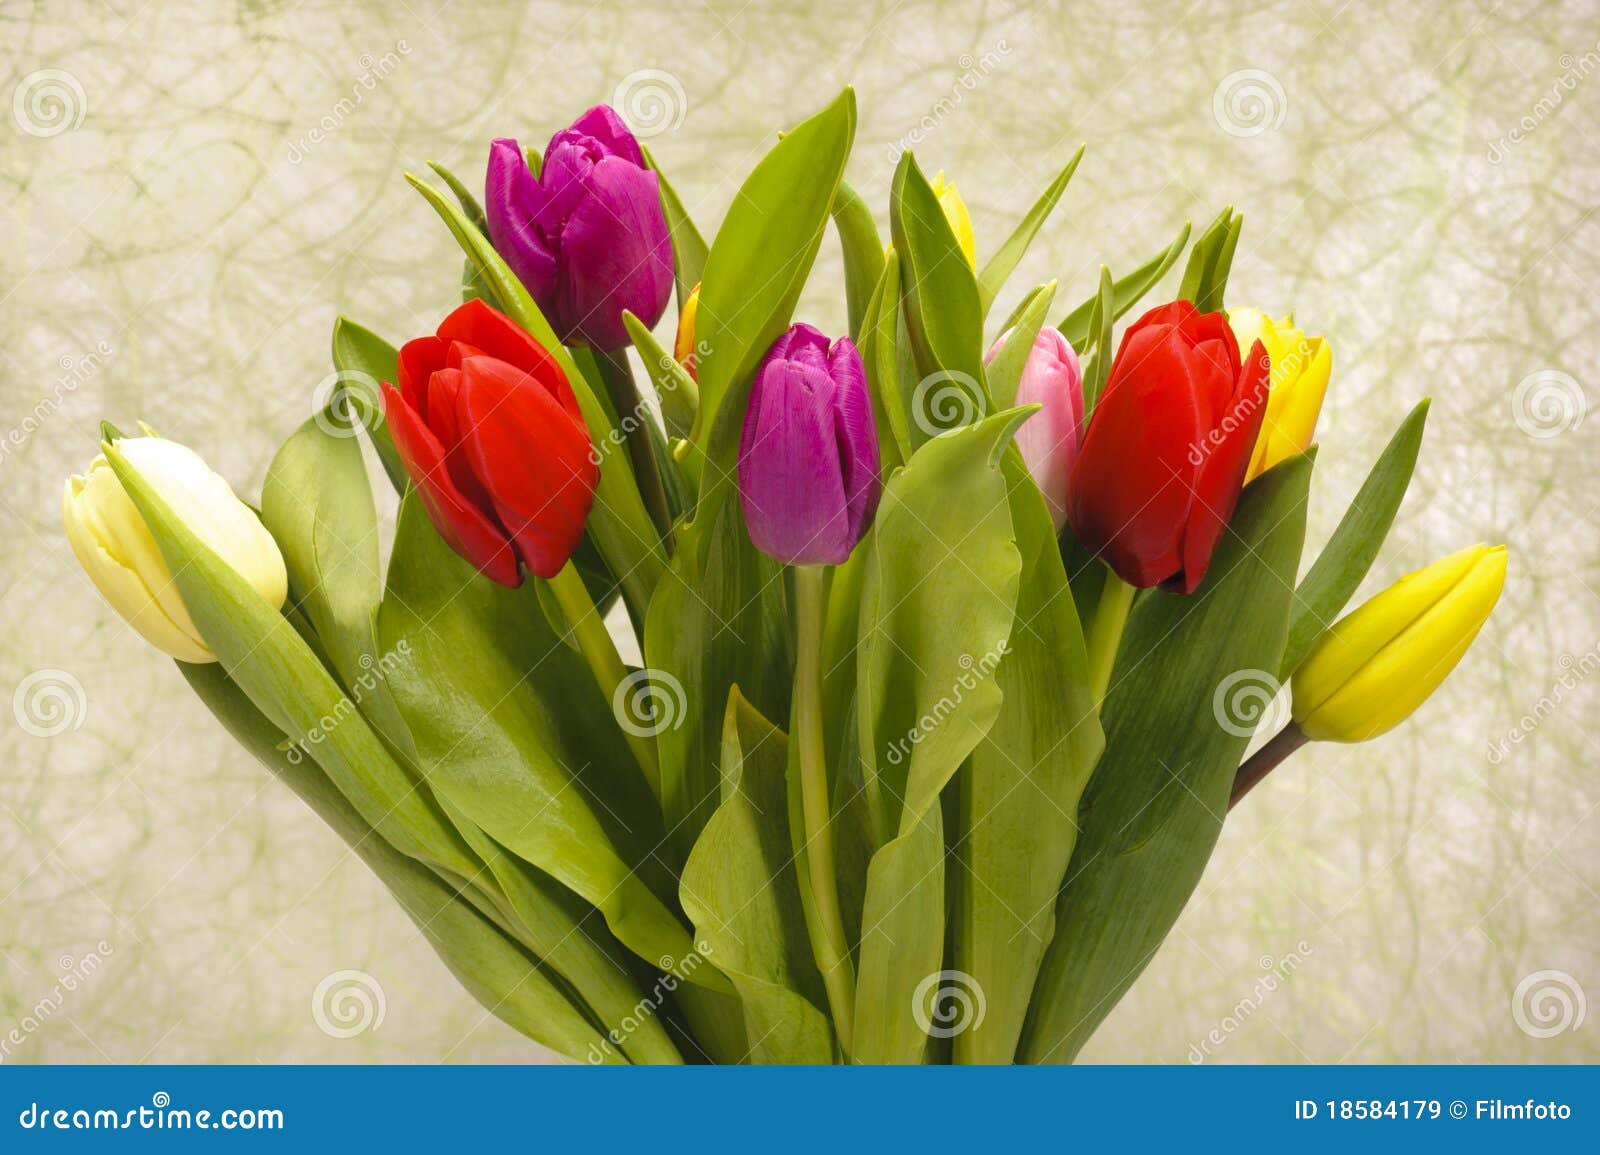 Easter tulip bunch stock image. Image of love, holiday - 18584179